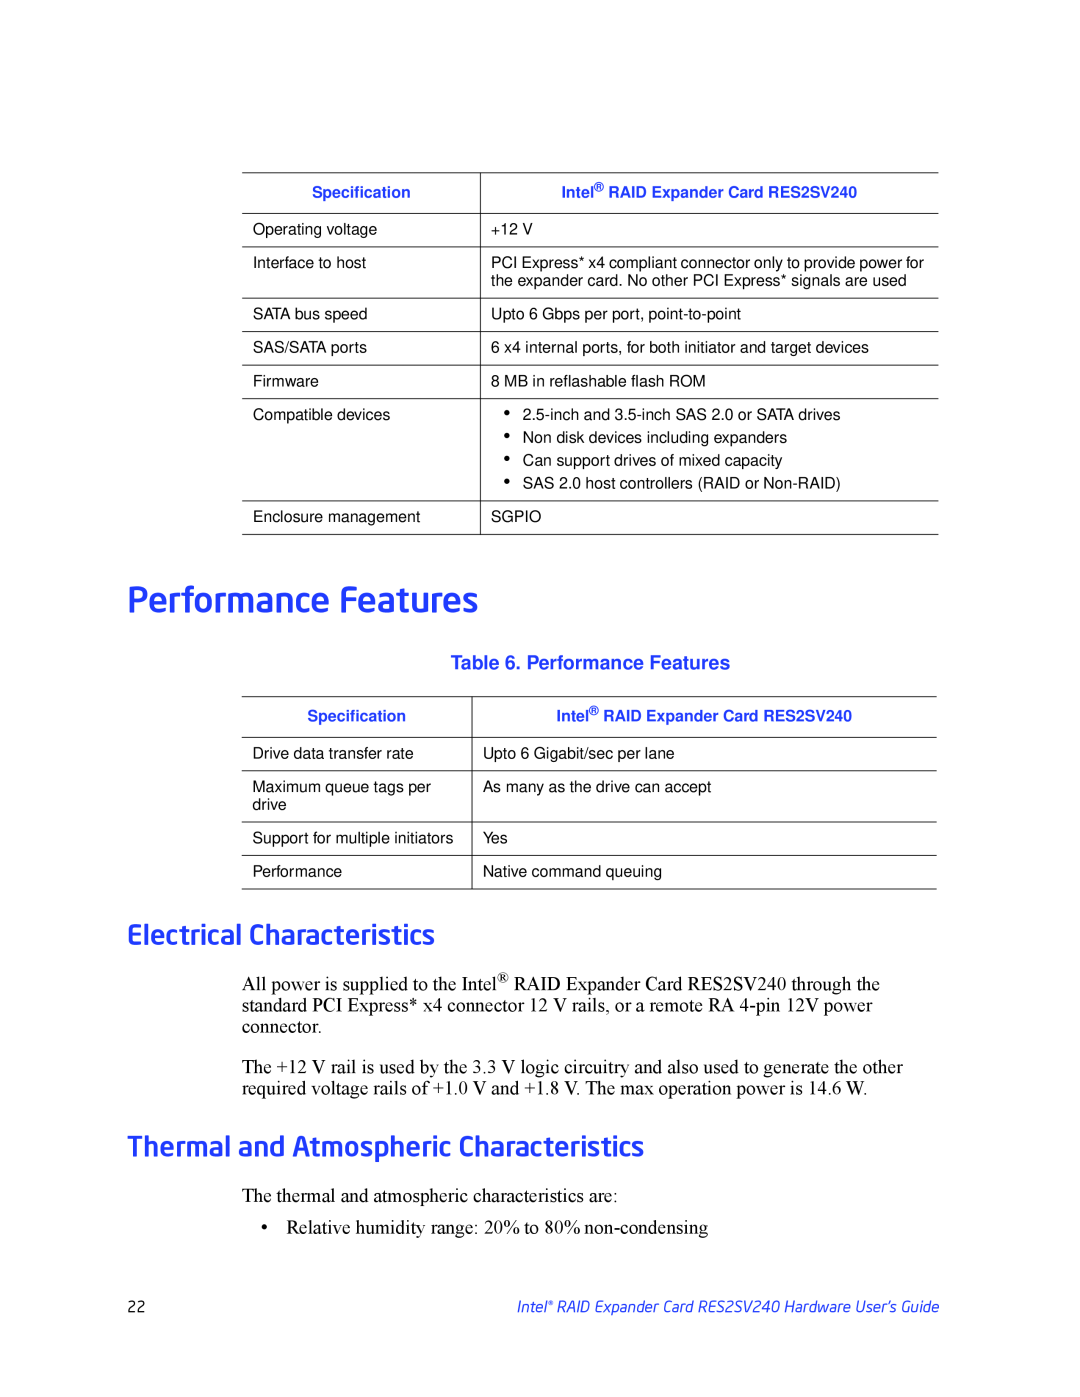 Intel RES2SV240 manual Performance Features, Electrical Characteristics, Thermal and Atmospheric Characteristics 